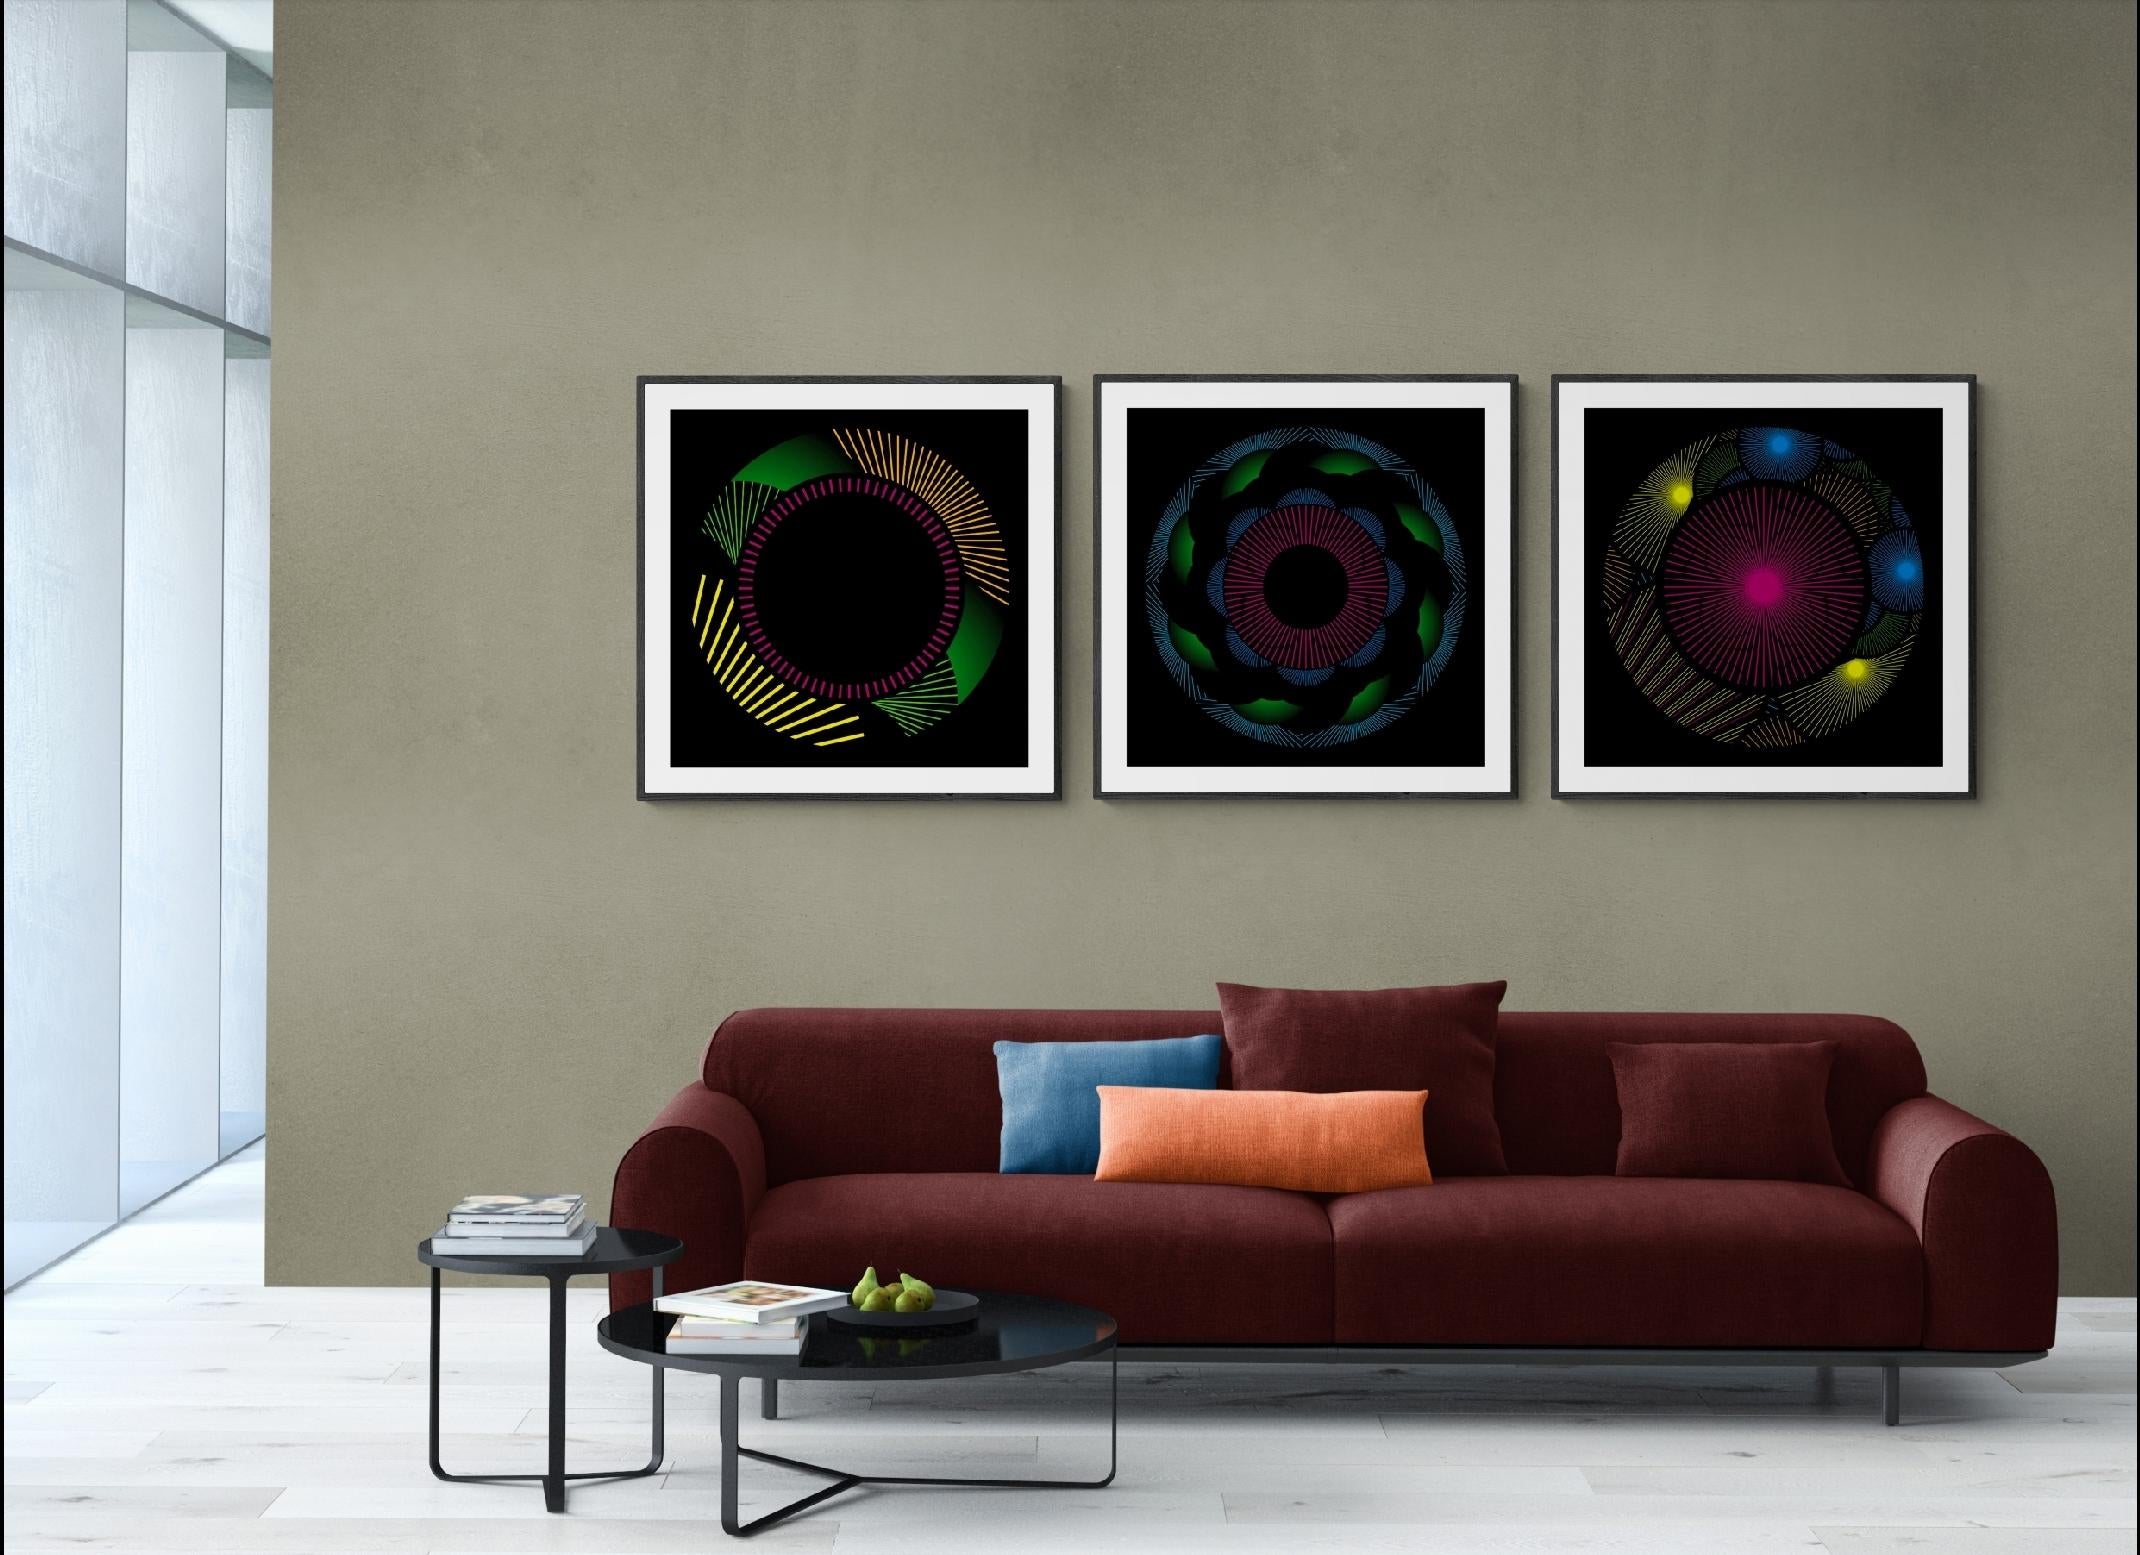 Nebulosa 17 - Black Abstract Print by Julio Campos